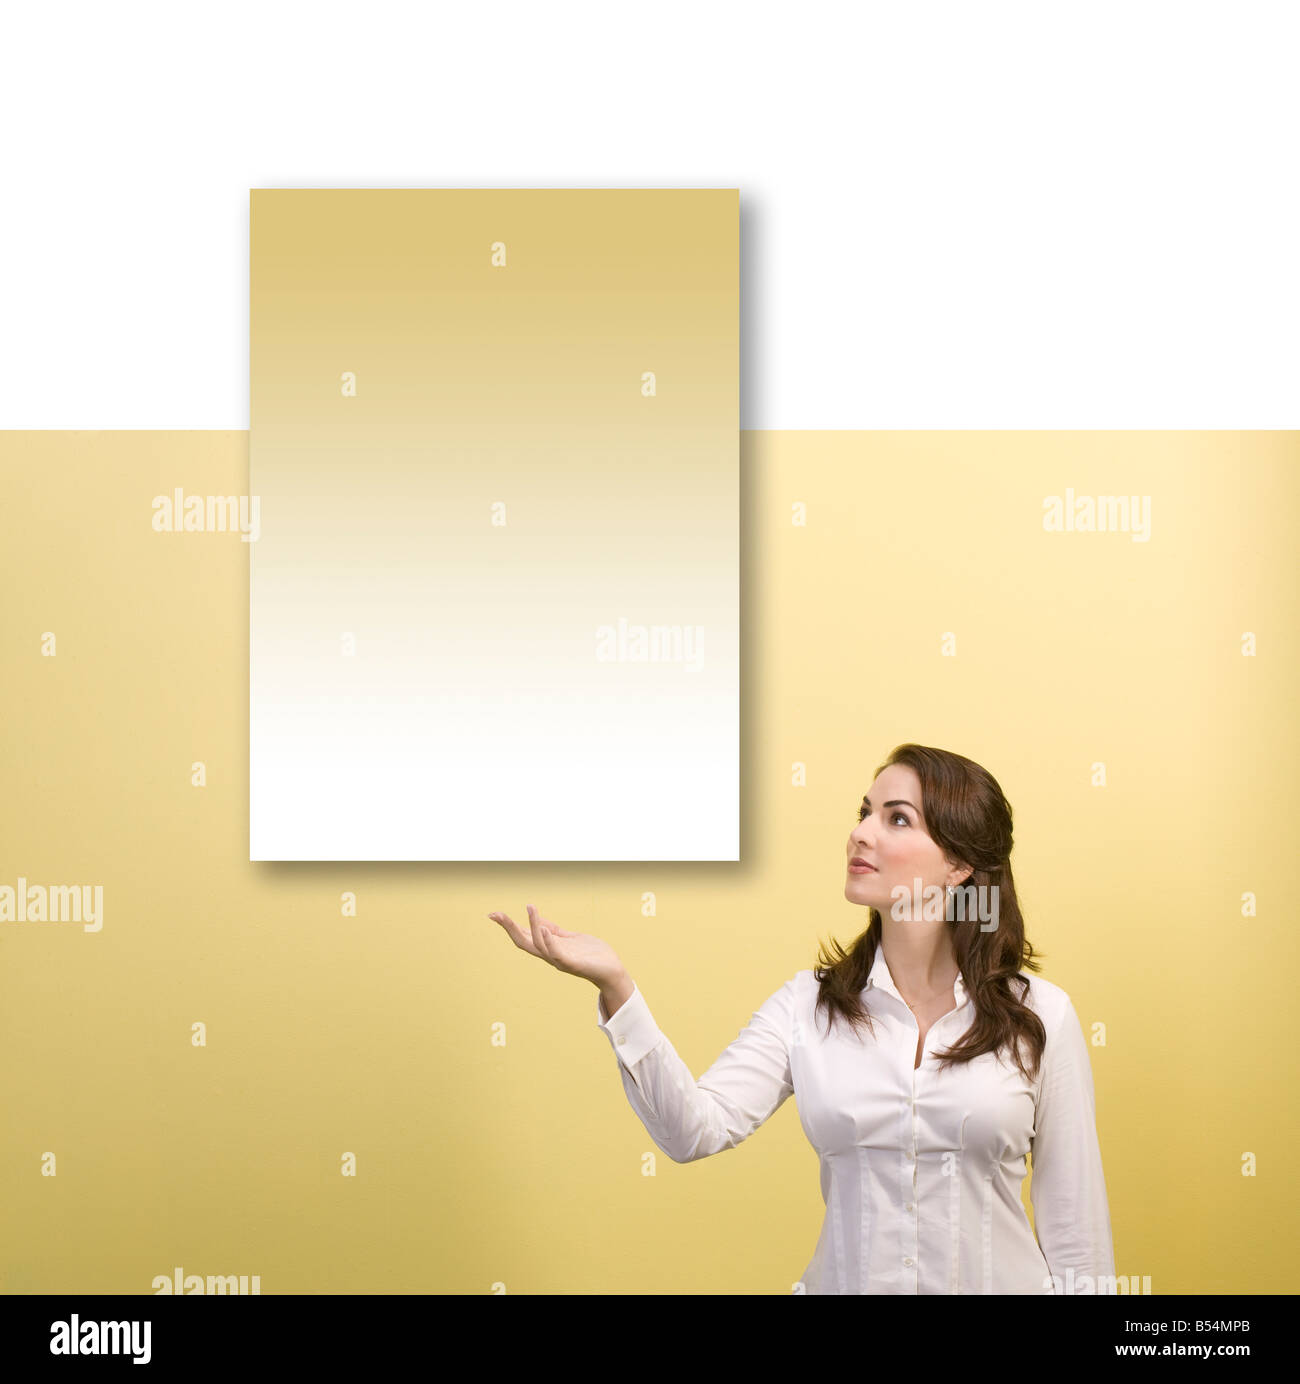 woman displays empty floating sign yellow and white Stock Photo